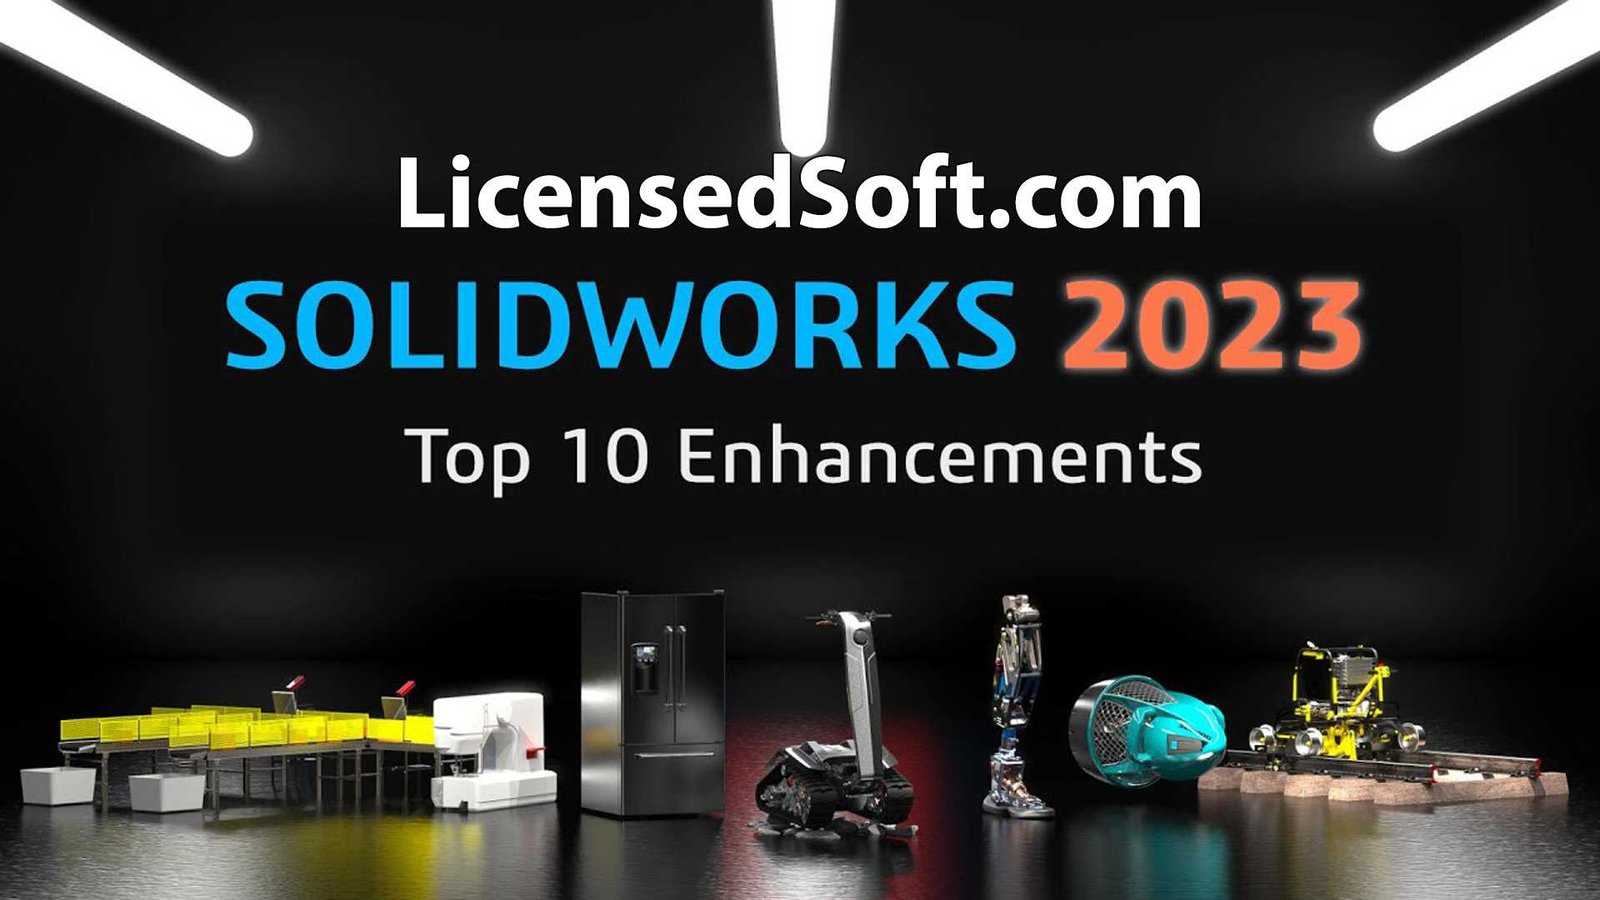 Solidworks SP3 2023 Full Premium Features By LicensedSoft